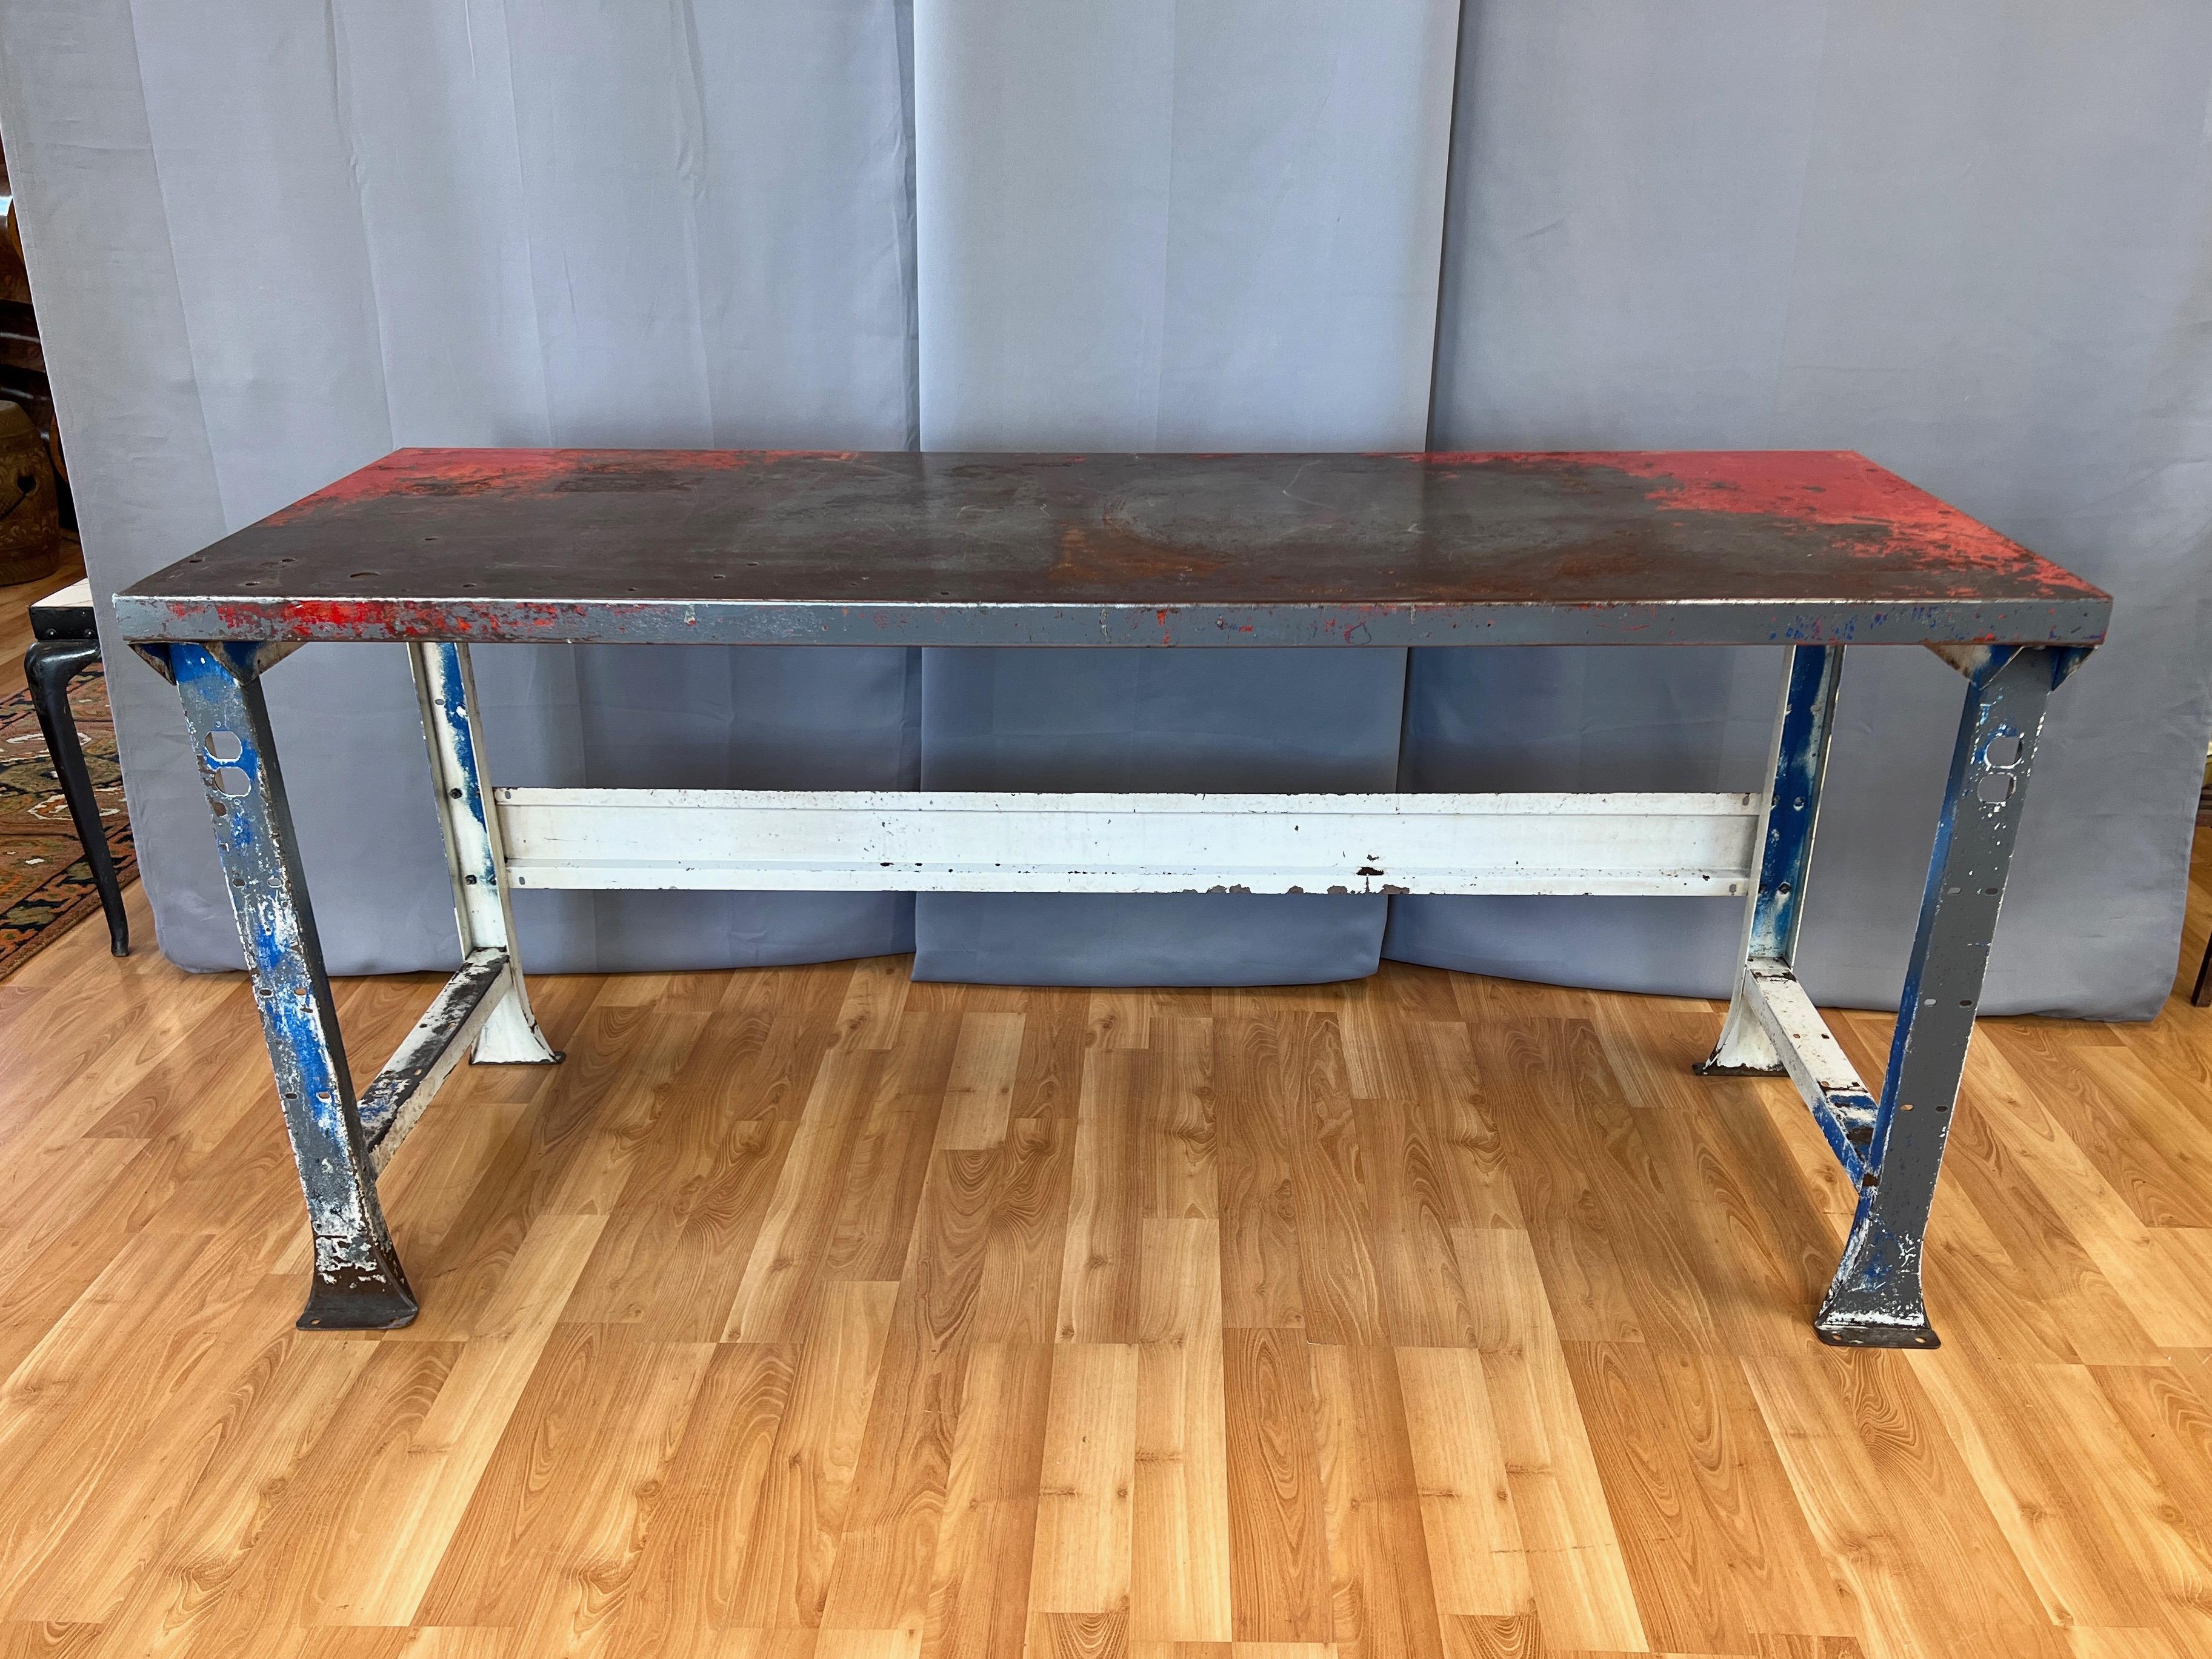 A circa 1940 American six-foot-long painted steel work table or work bench with fantastic industrial character.

Features authentically earned vintage character from top to bottom. Patriotic red, white, & blue (and a bit of battleship grey) paint,